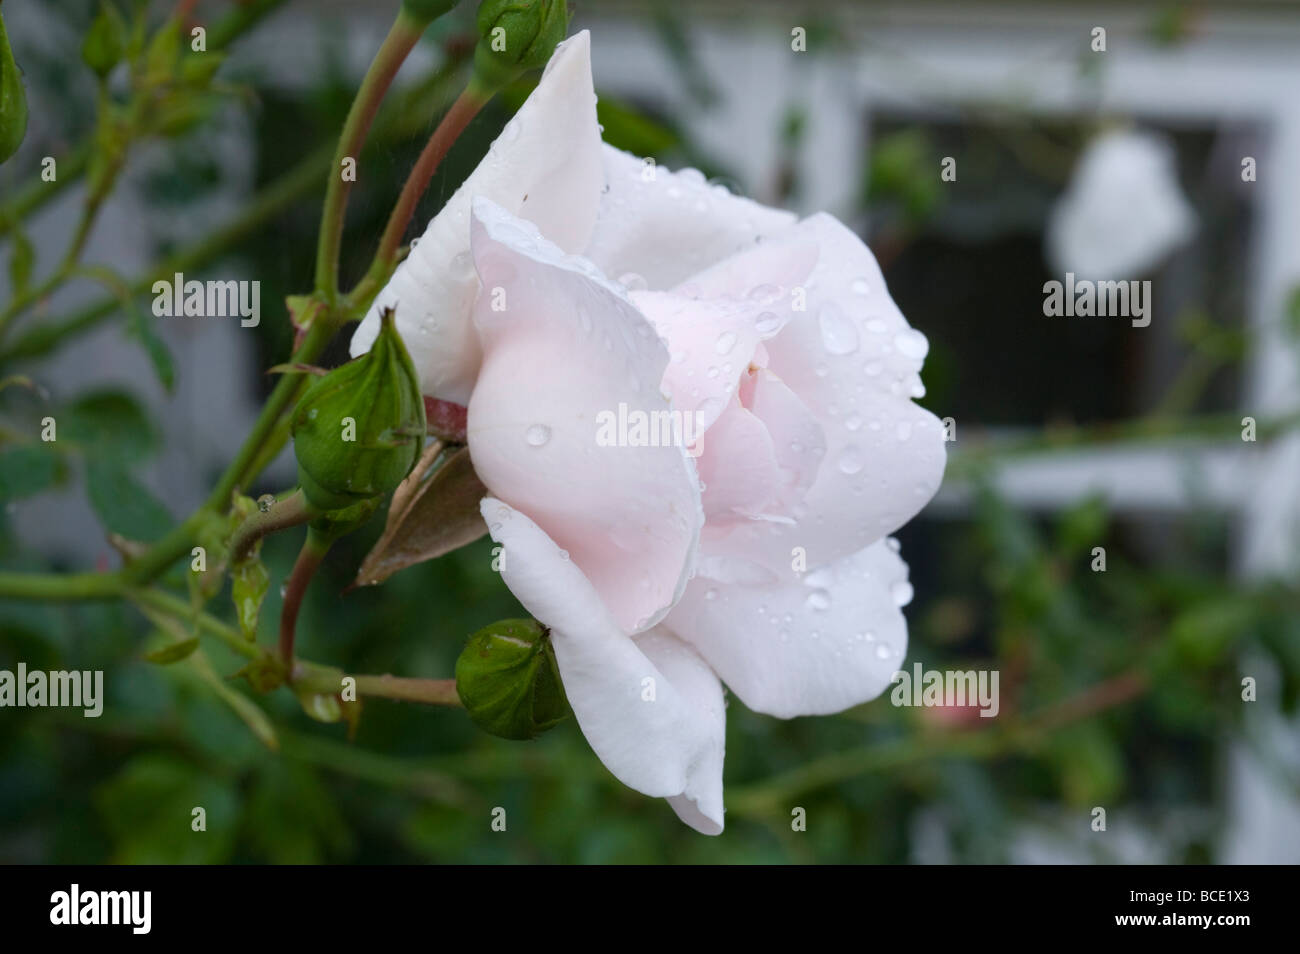 White rose with water droplets and a soft background Stock Photo